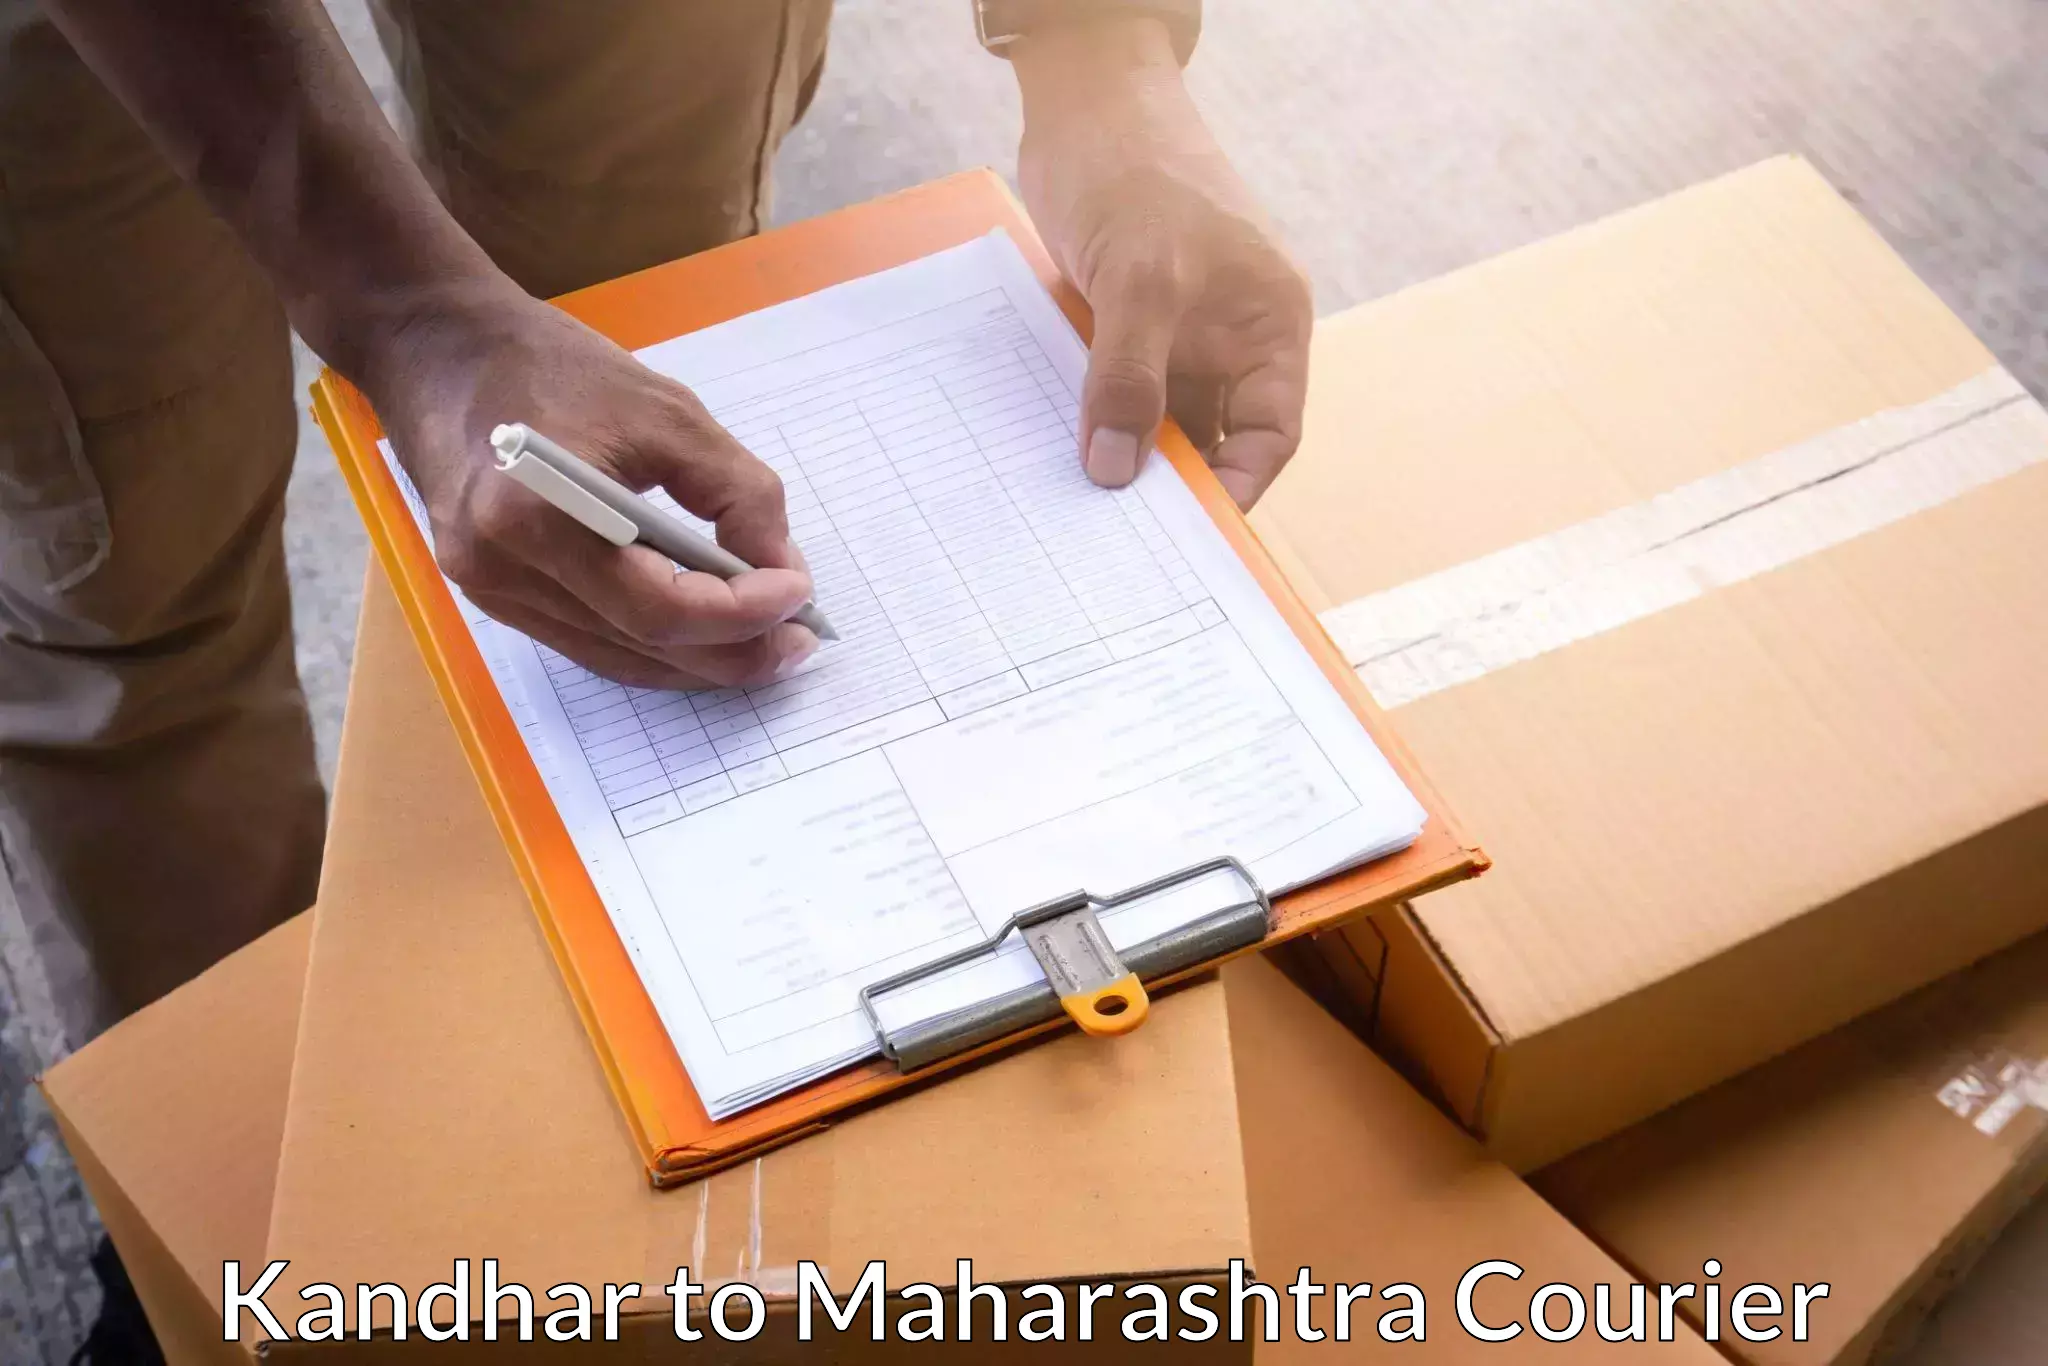 On-call courier service Kandhar to Bhusawal